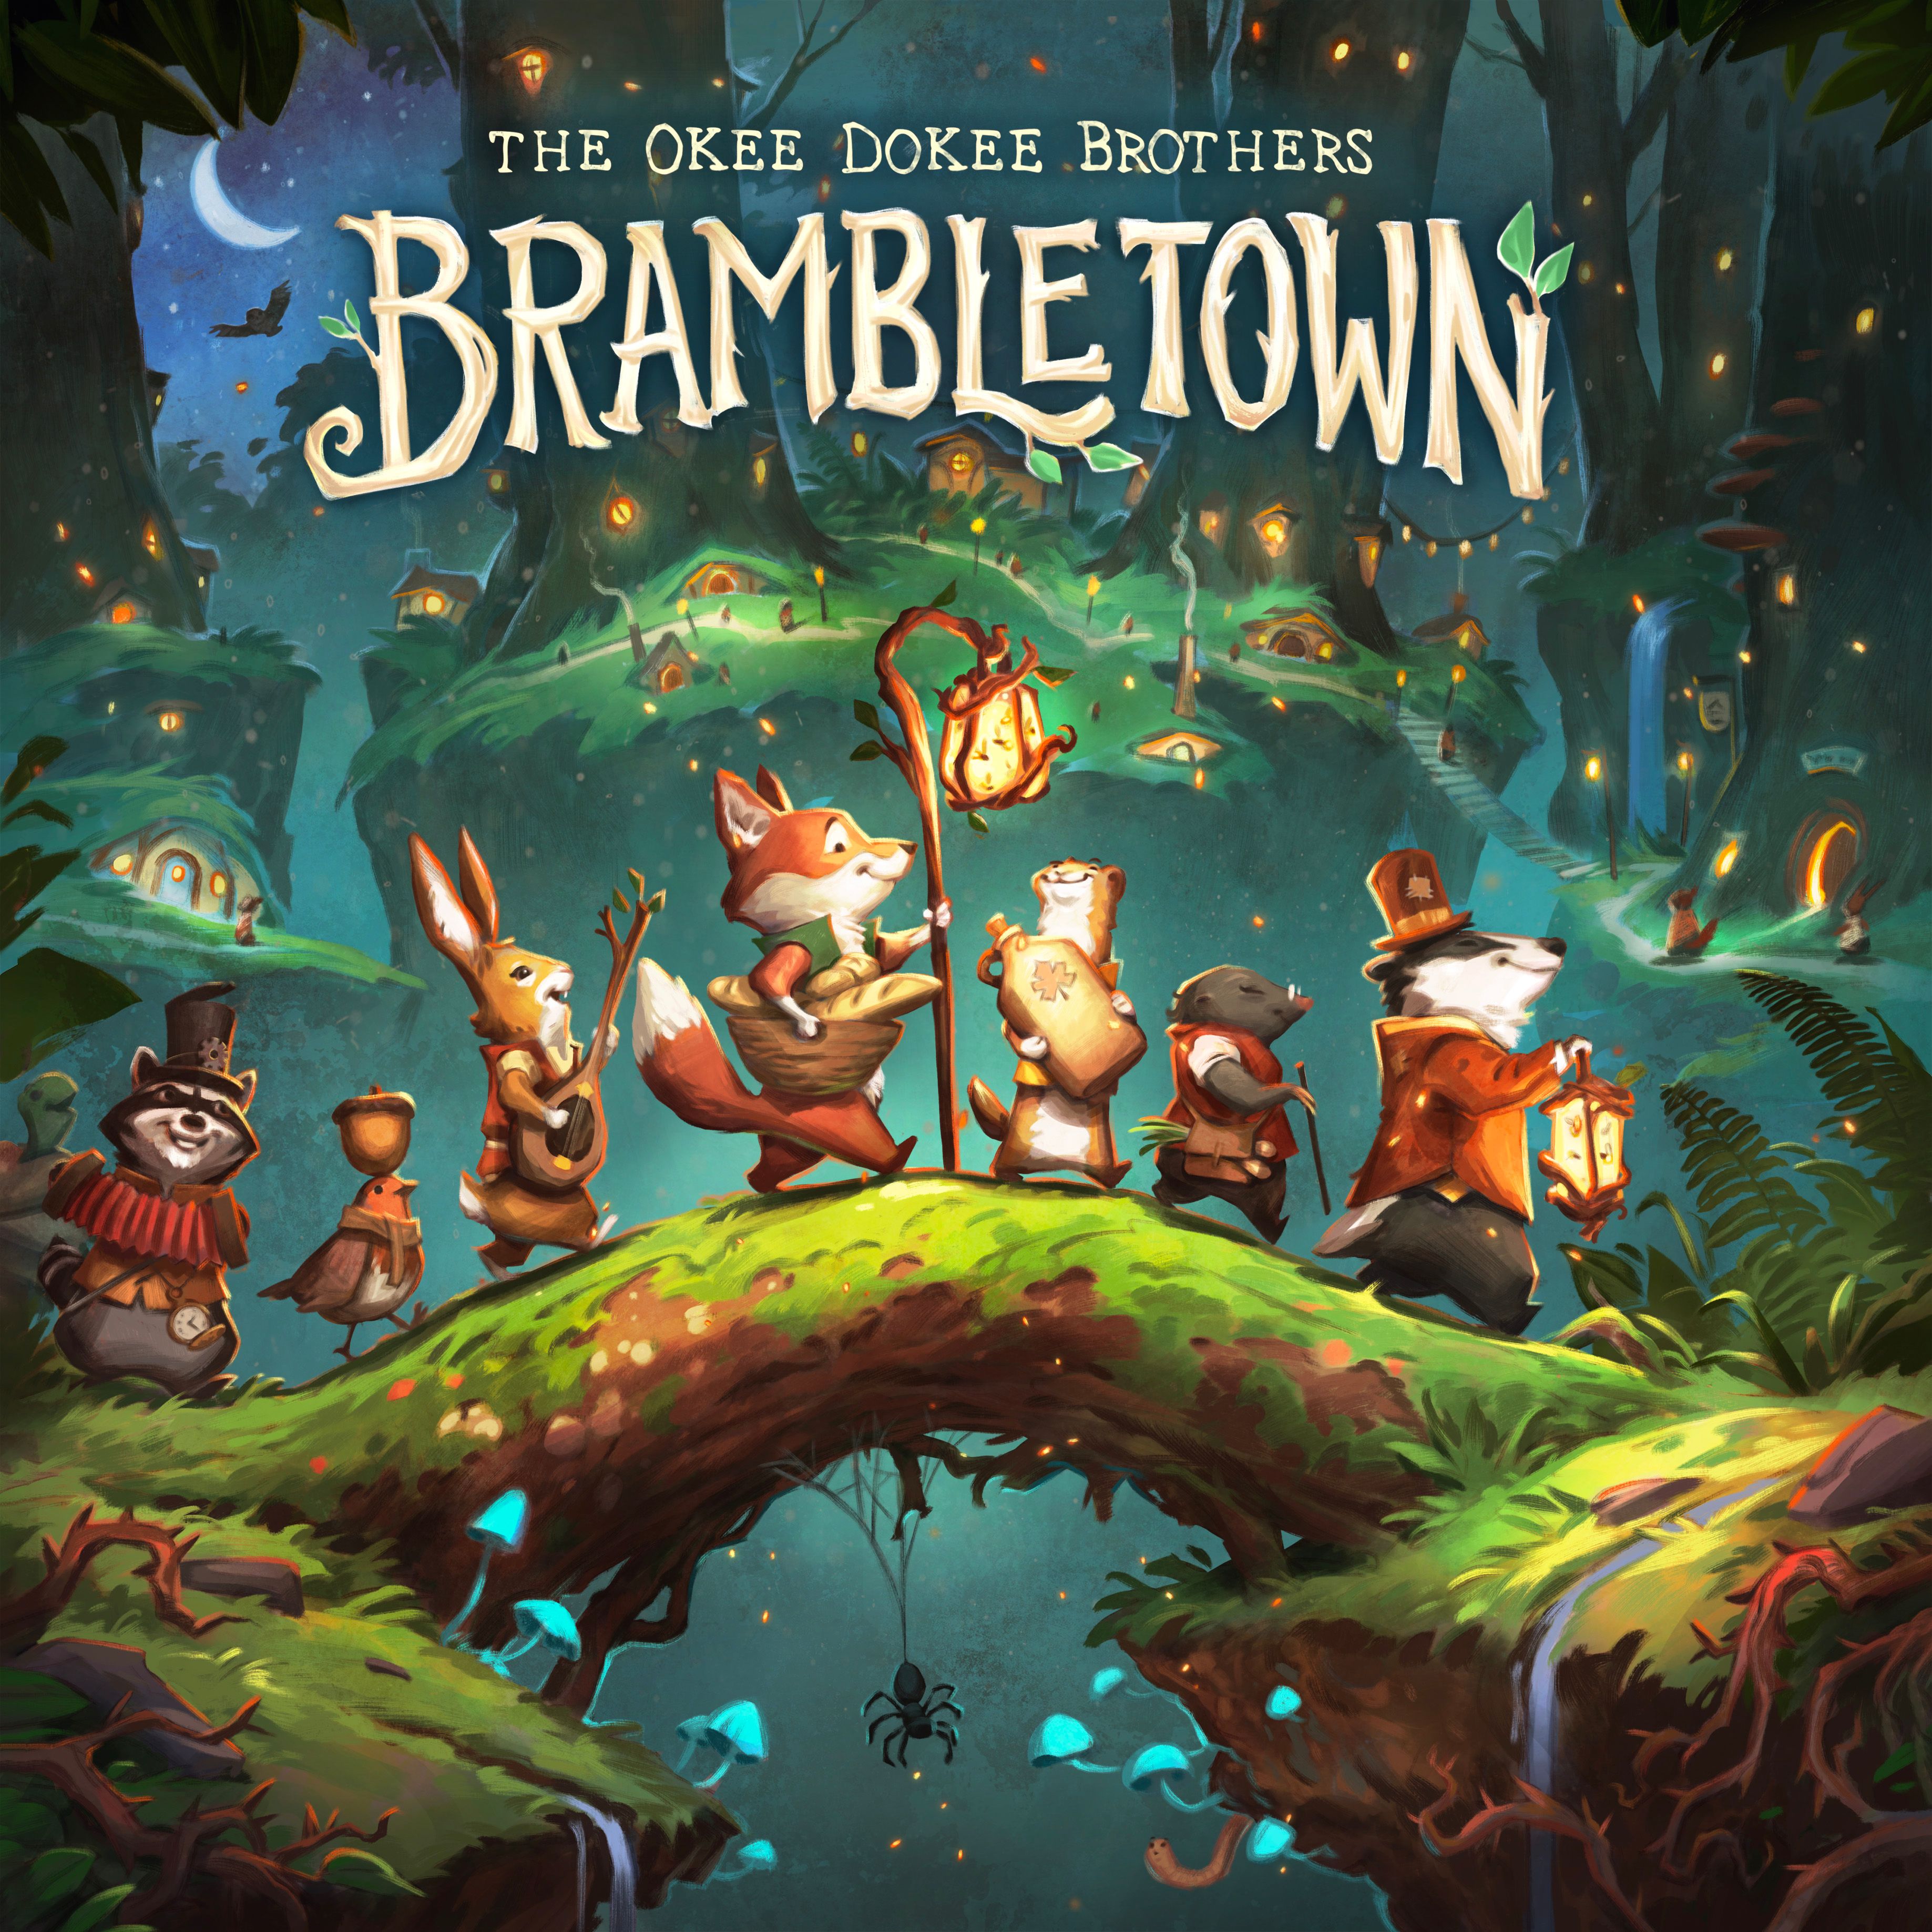 THE OKEE DOKEE BROTHERS GUIDE FANS ON A MUSICAL WOODLAND ADVENTURE TO BRAMBLETOWN